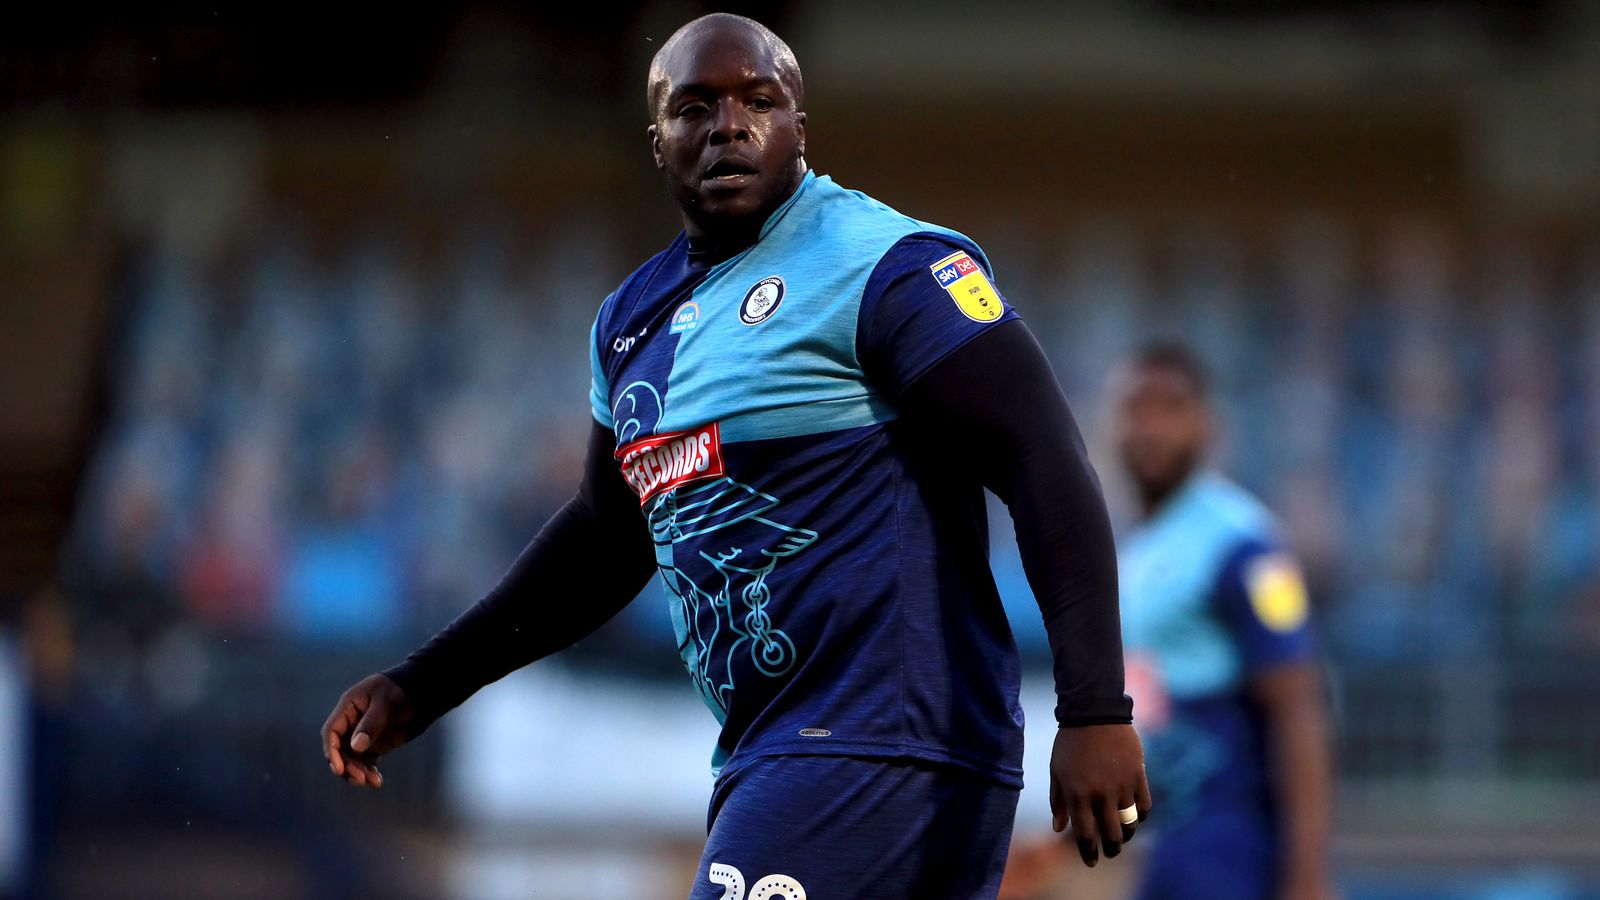 Adebayo Akinfenwa says he was called a 'Fat Water Buffalo' during play-off match | Football News